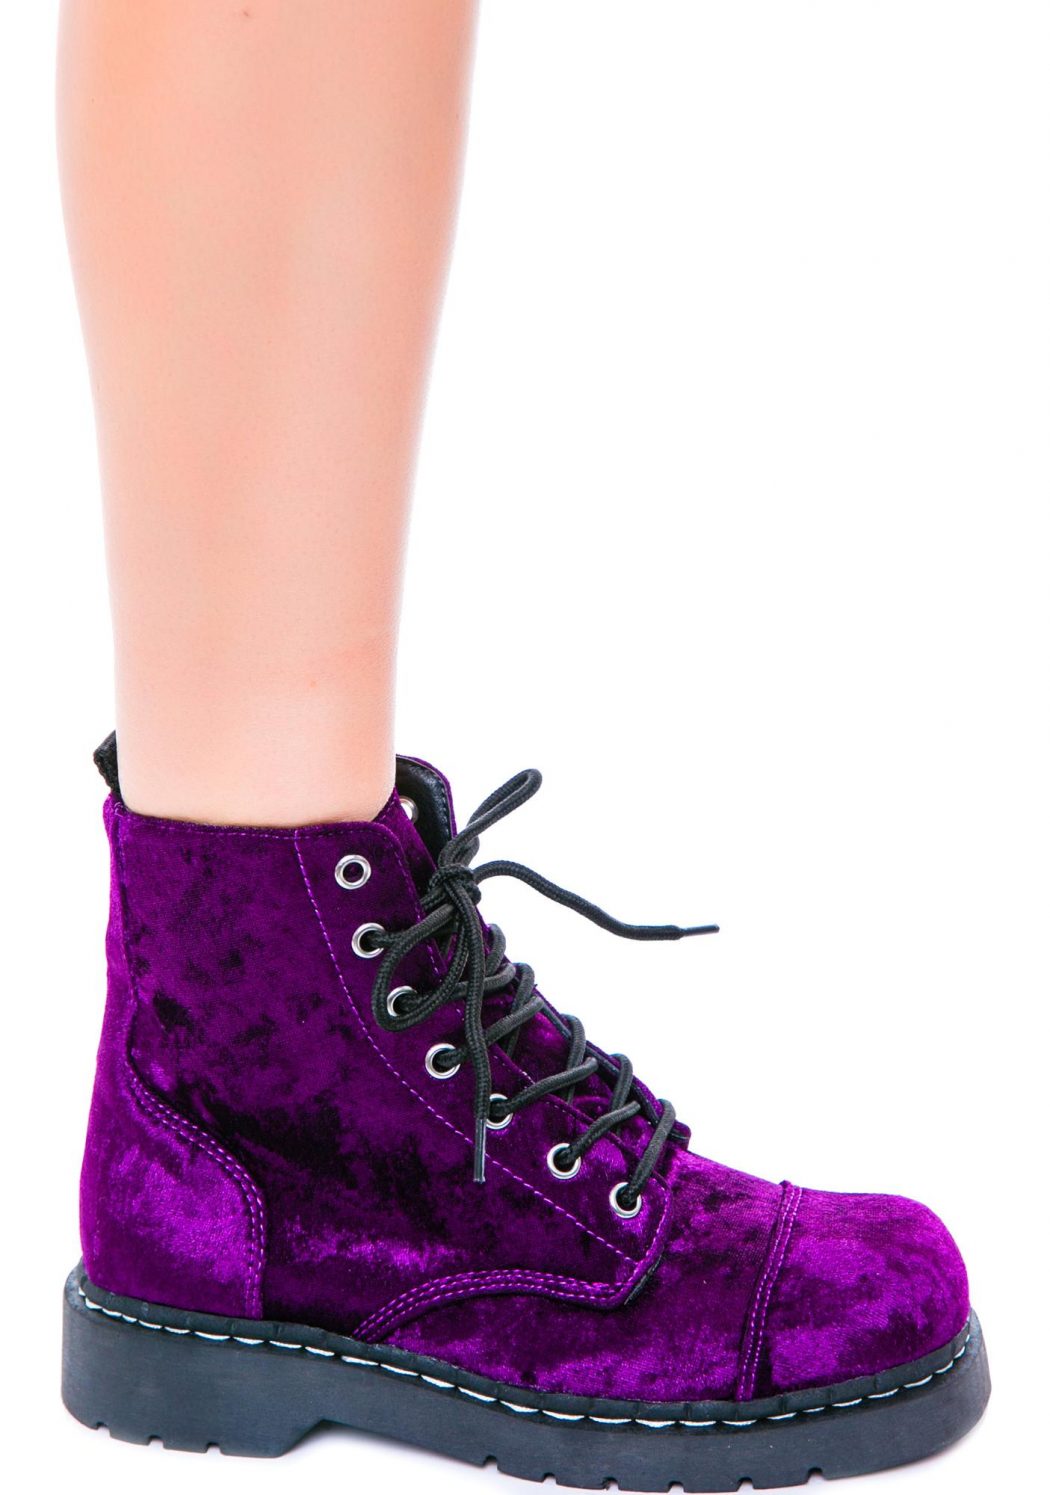 Velvet Boots1 Top 10 Most Stylish Boot Trends - 14